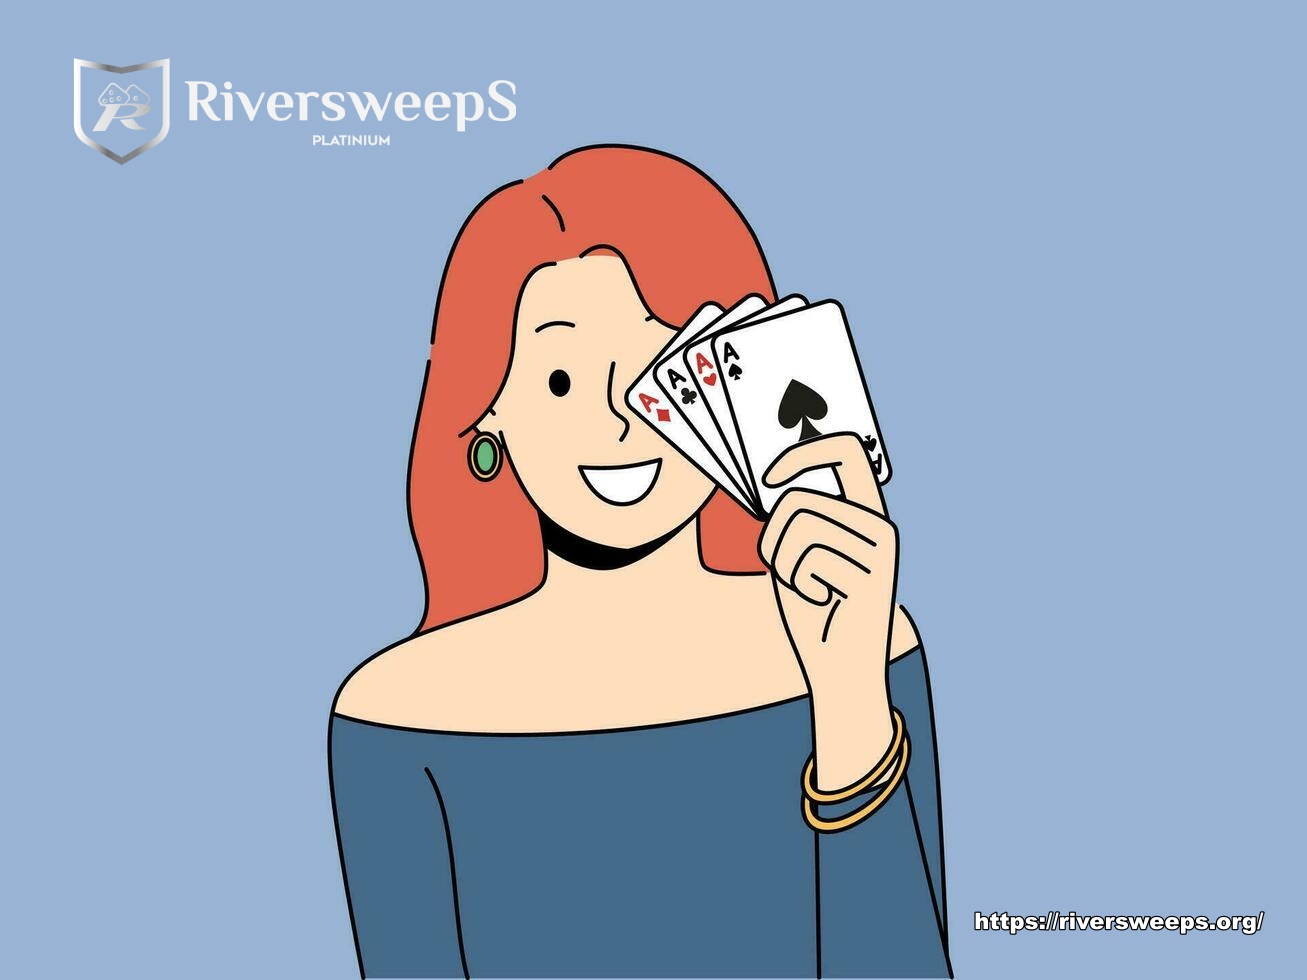 River Sweeps: Enhance Your Gaming Experience with Exclusive Bonuses